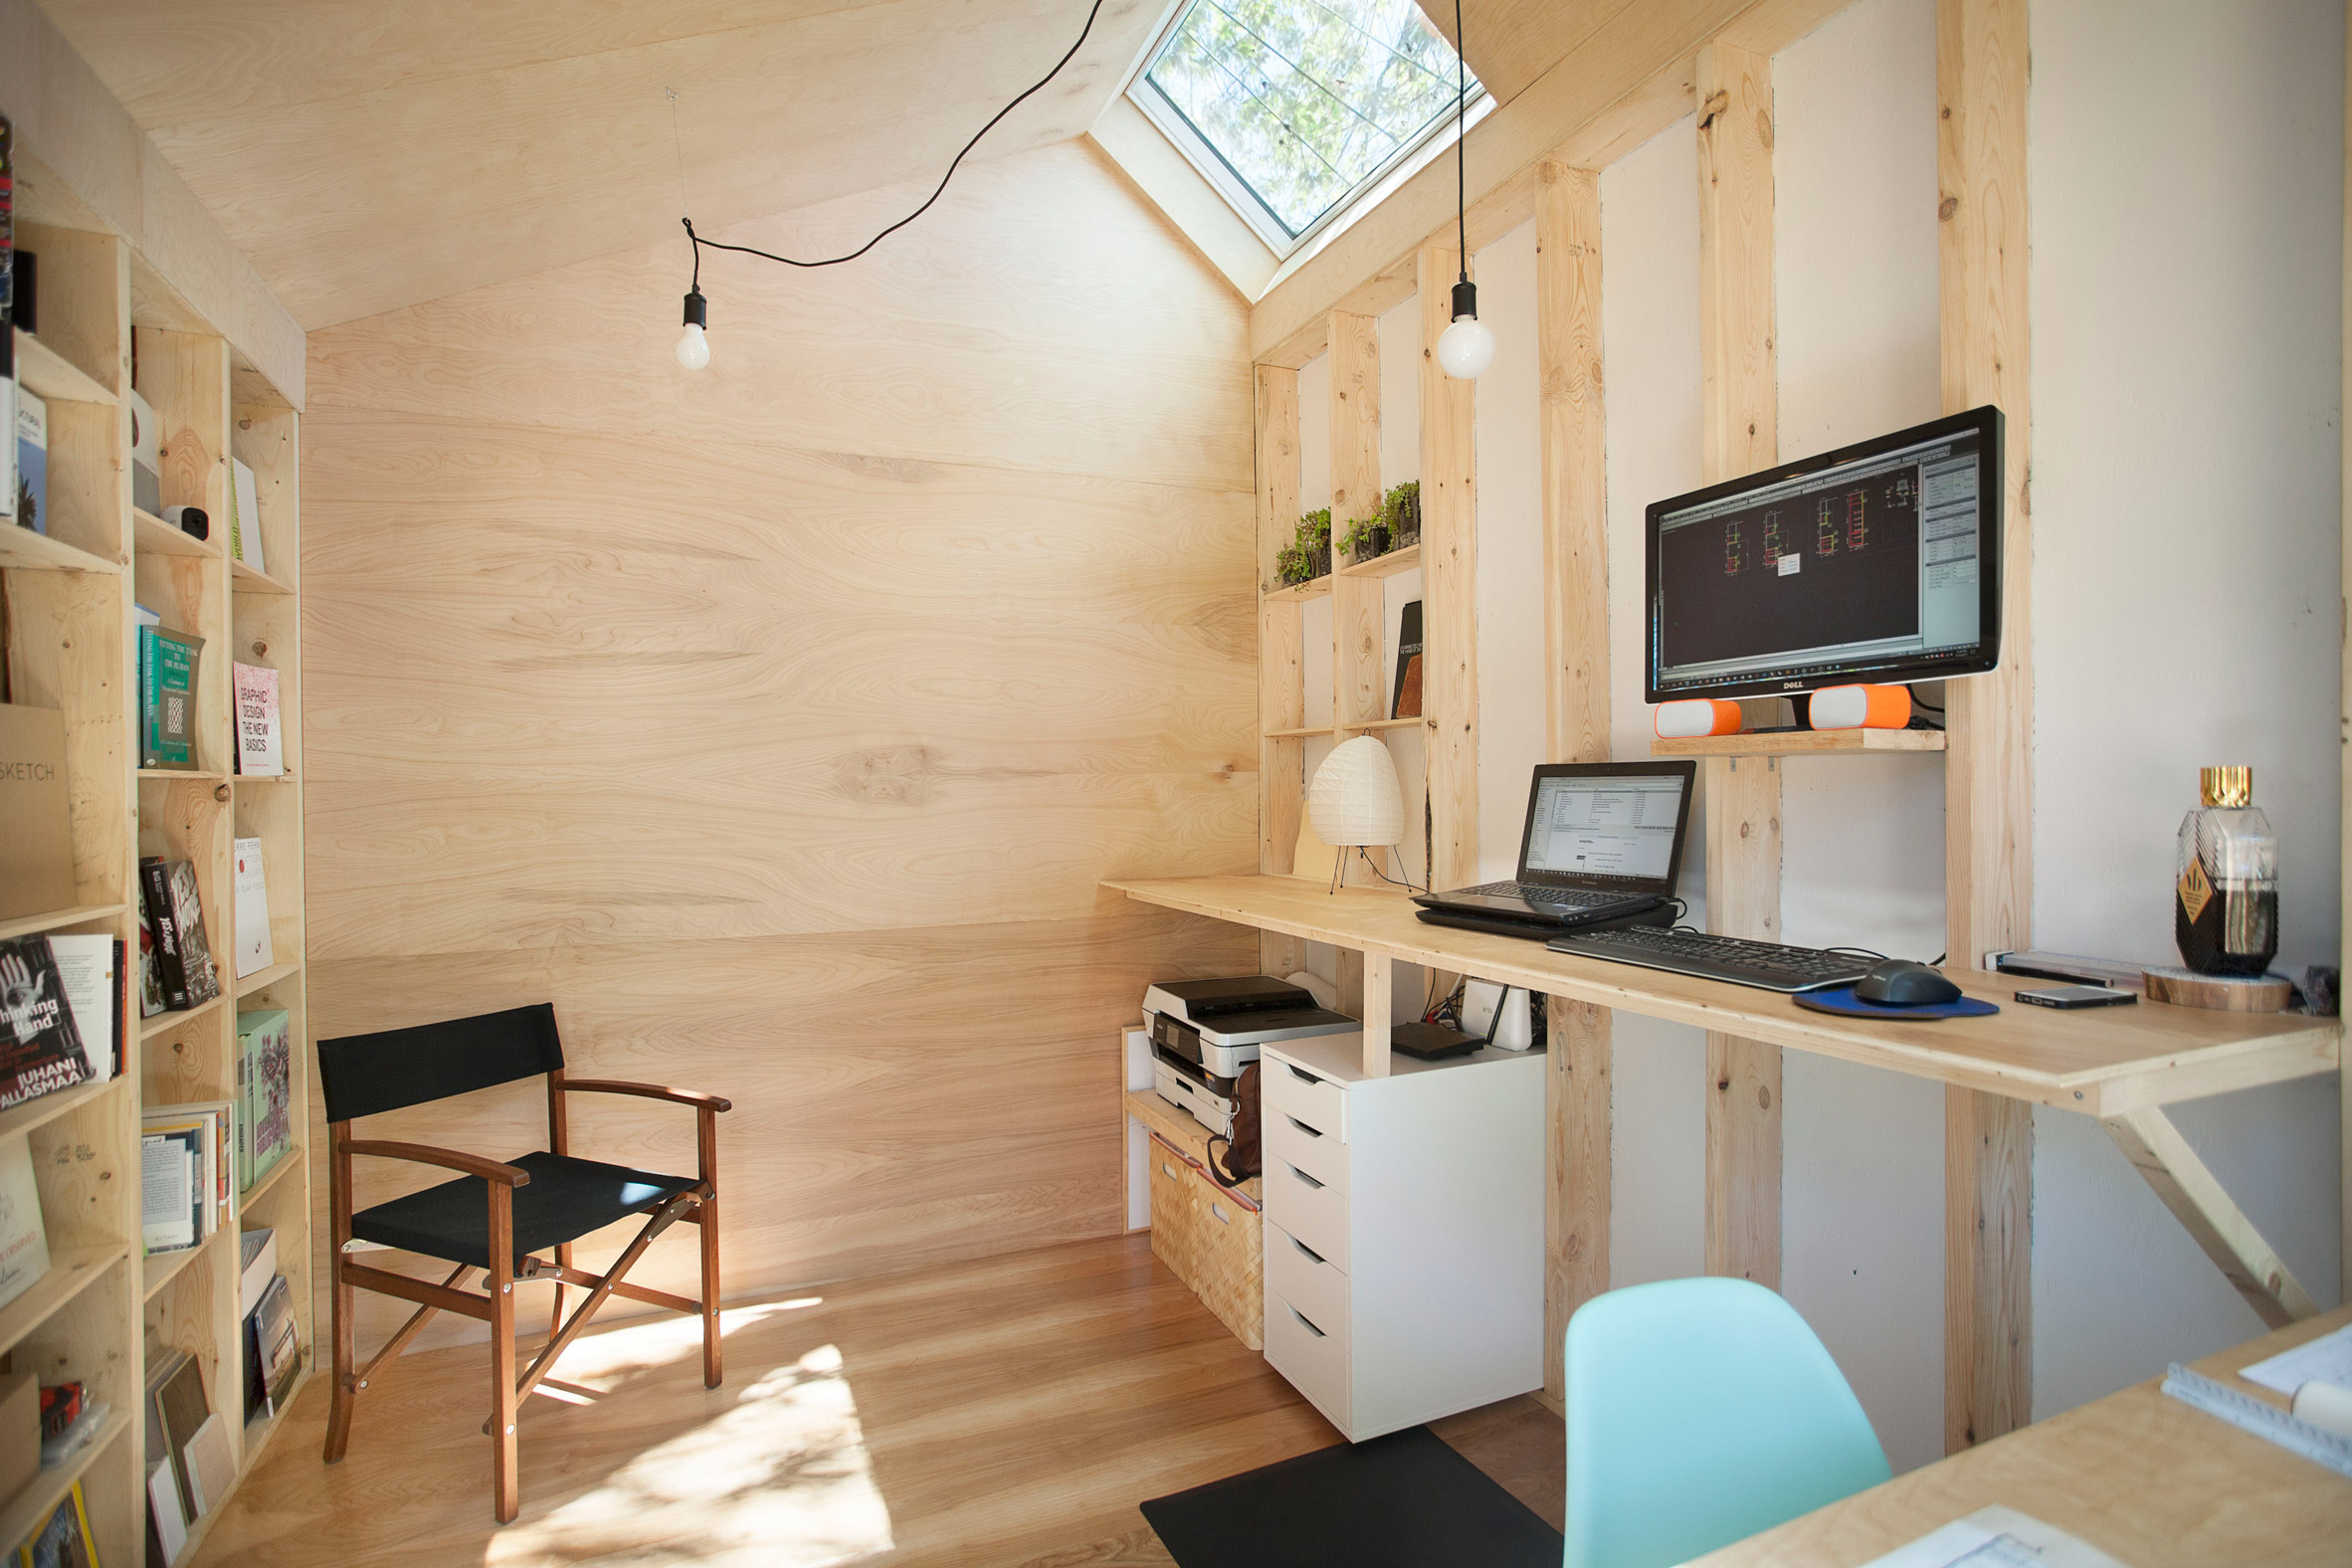 Interior of The Garden Studio by Six Four Five A